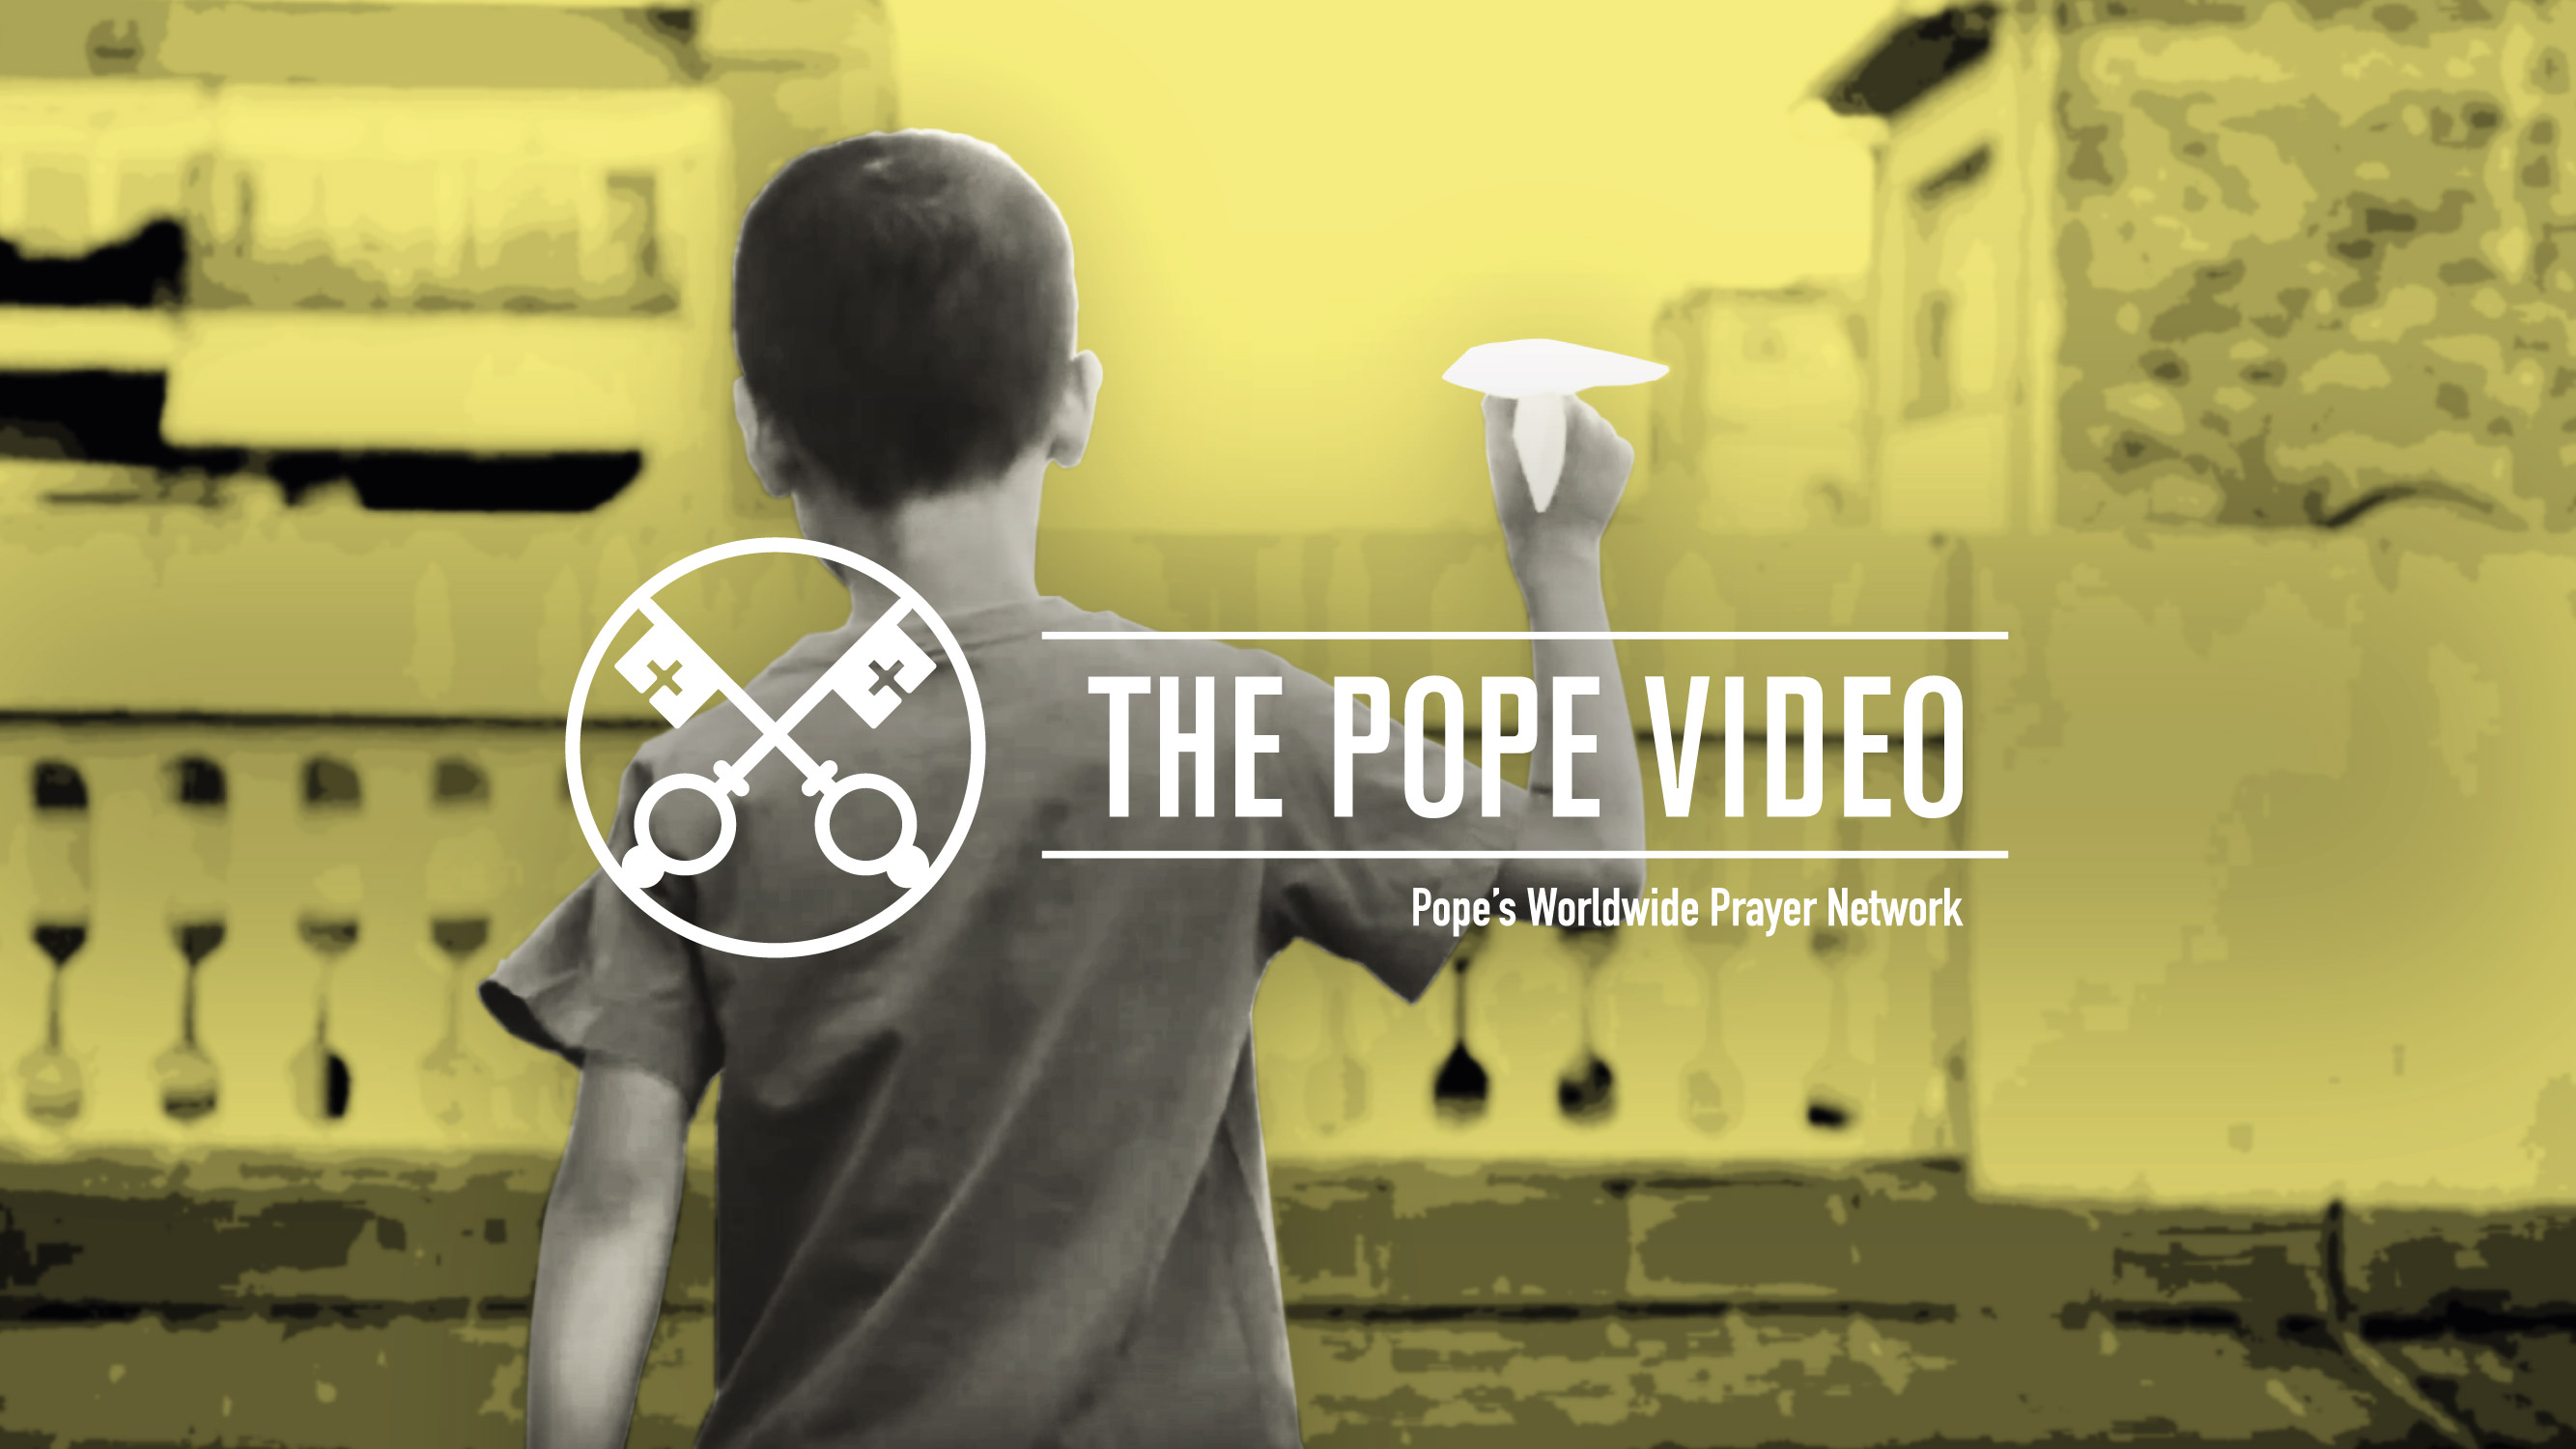 The Pope Video October 2019 (Official Image)